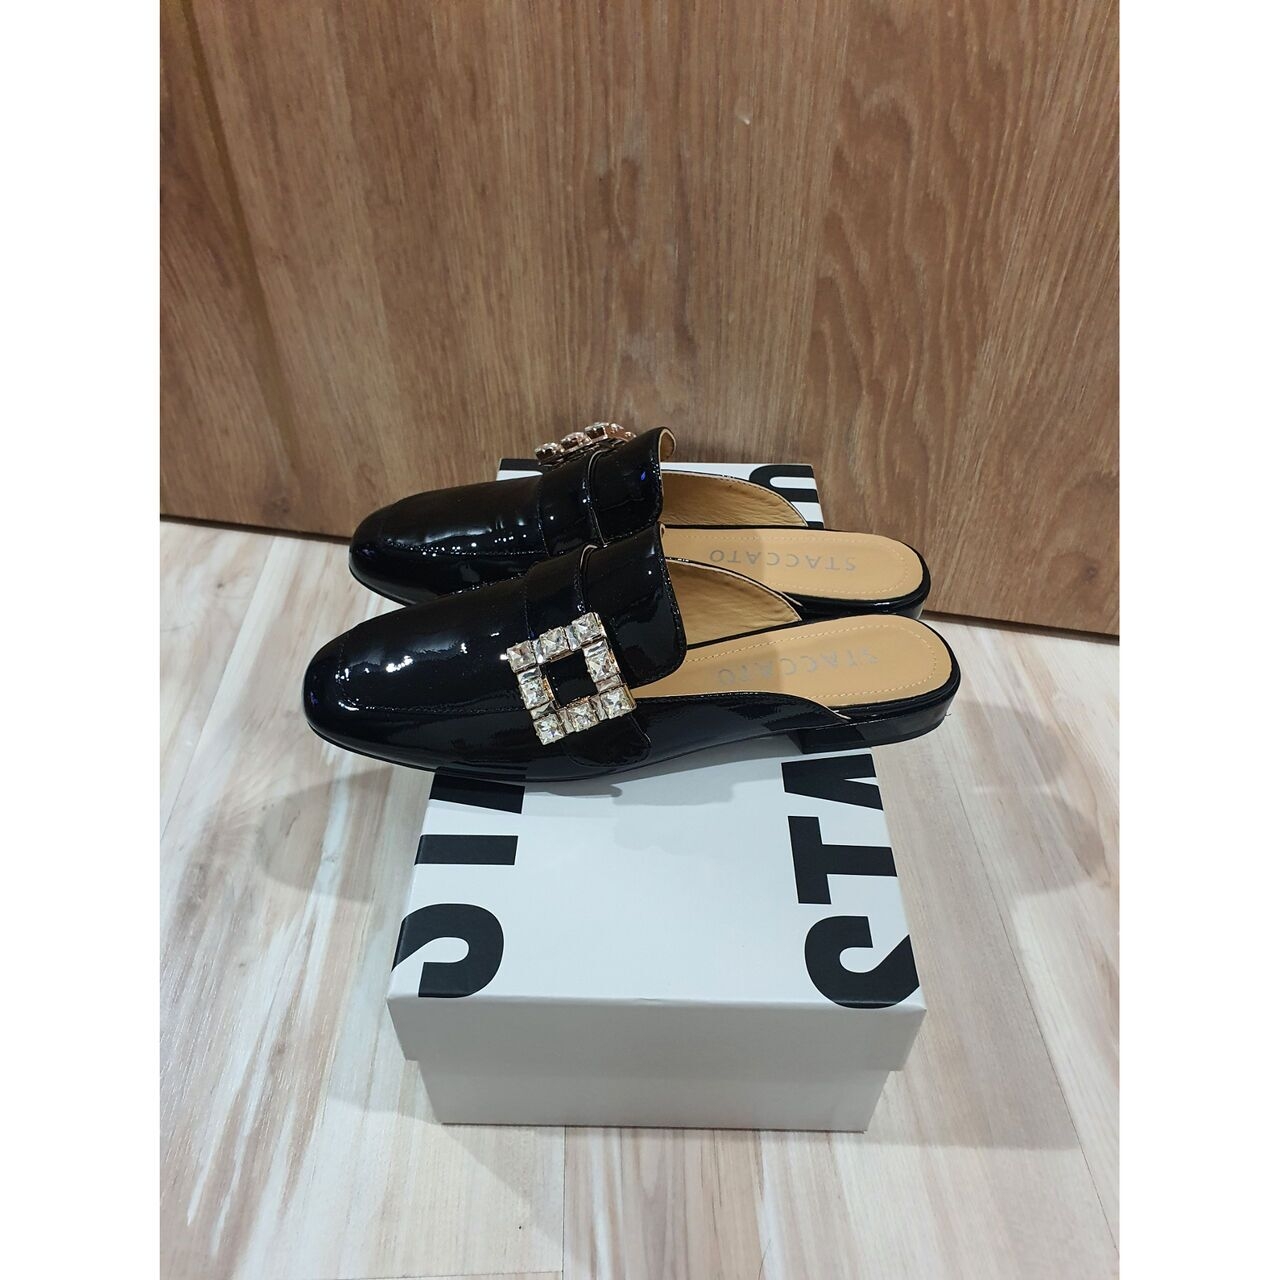 Staccato Black Sandal Mules